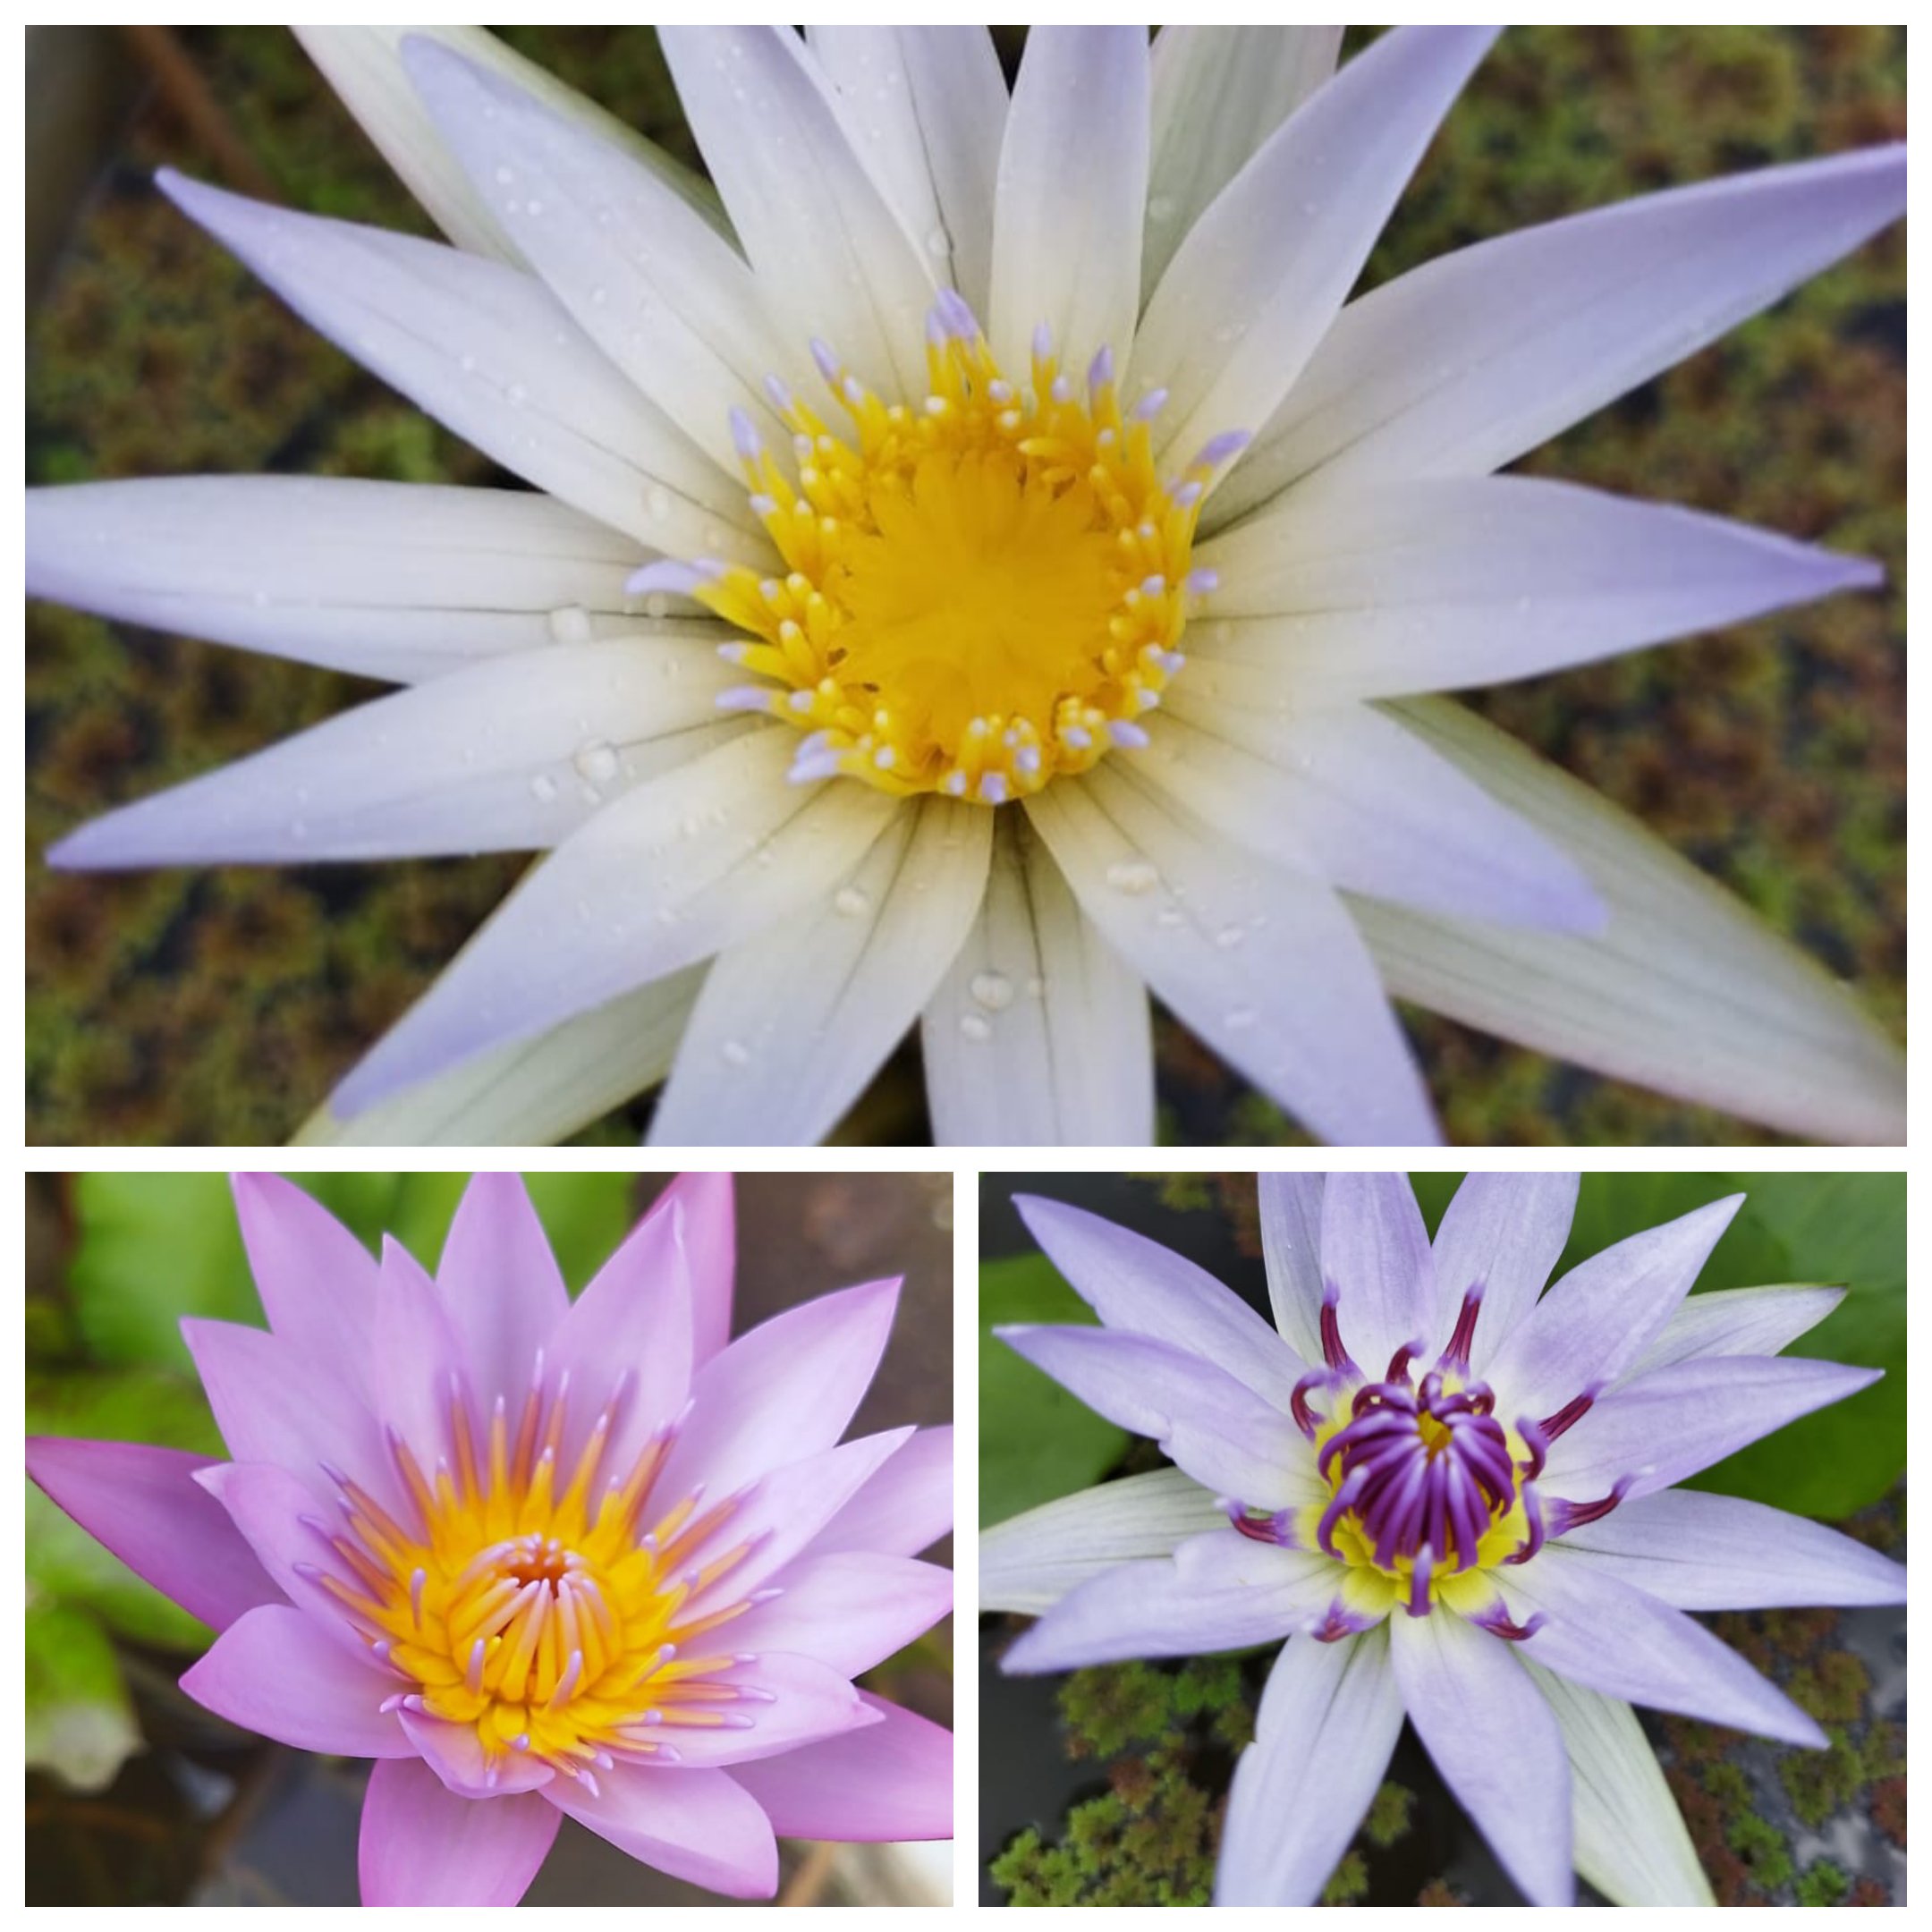 Water lily begginers combo (3 plants)